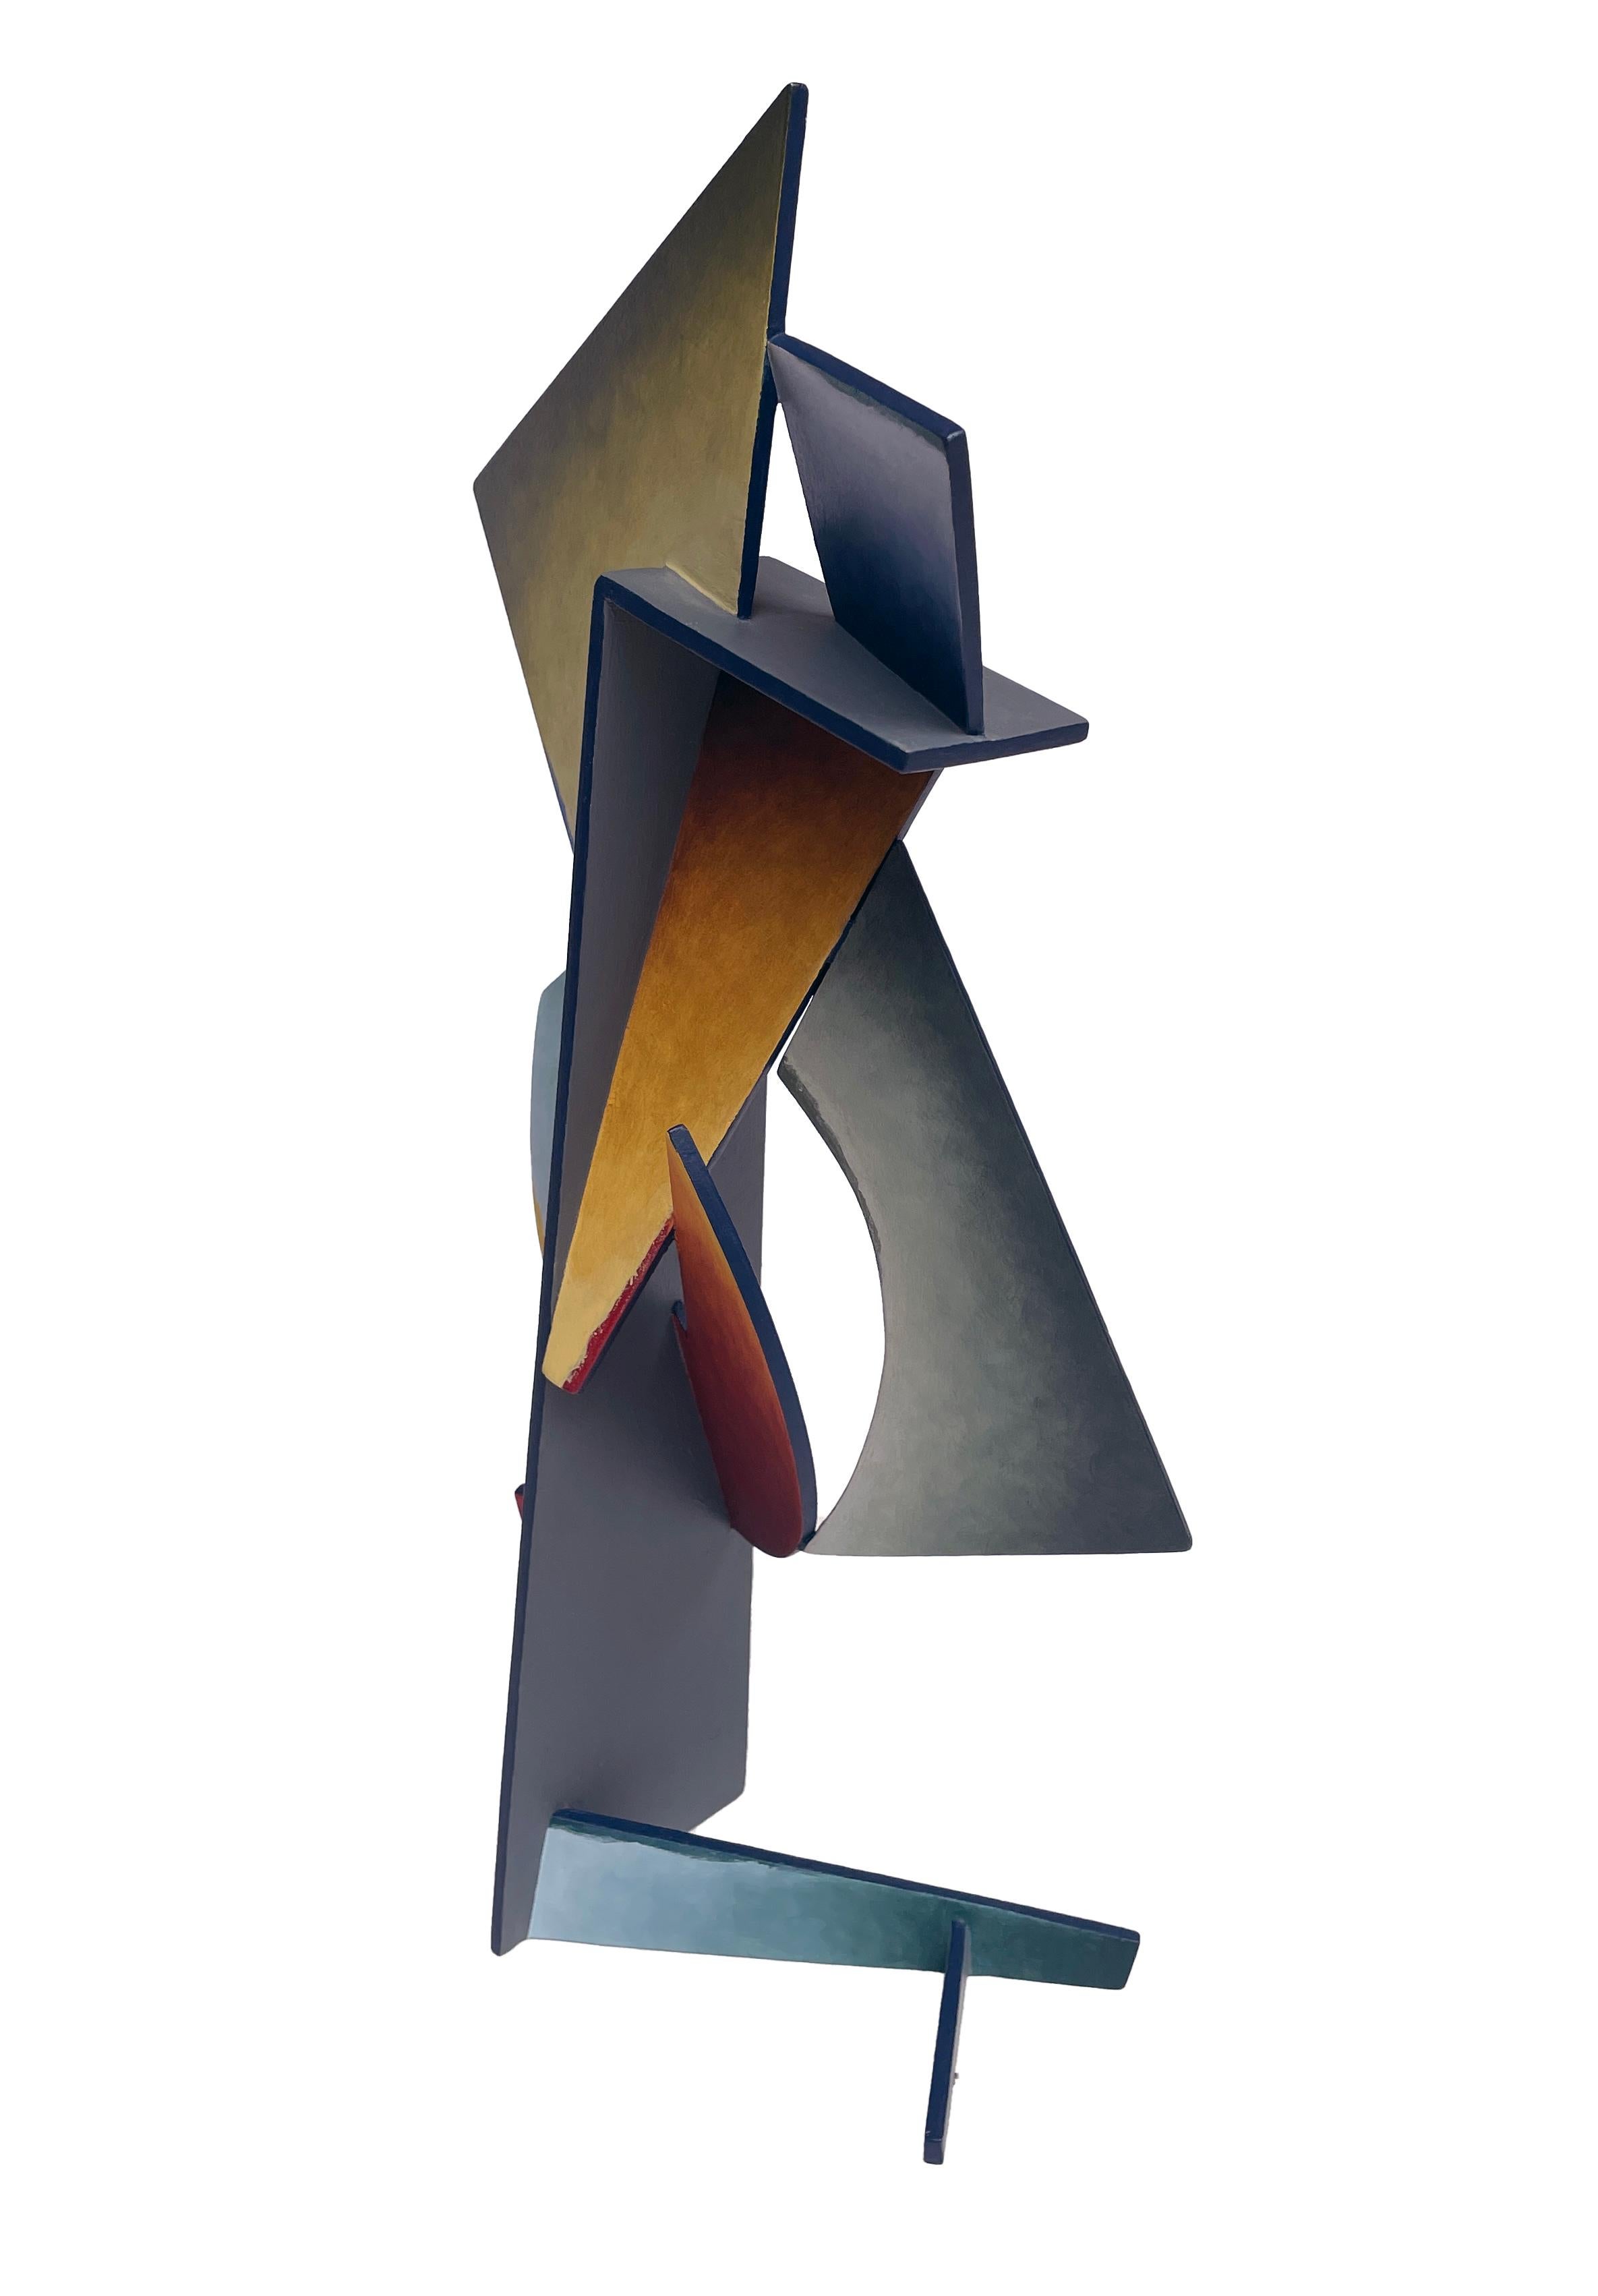 Nightfall Dreams - Abstract Geometric Form, Hand Painted Welded Steel Sculpture  1